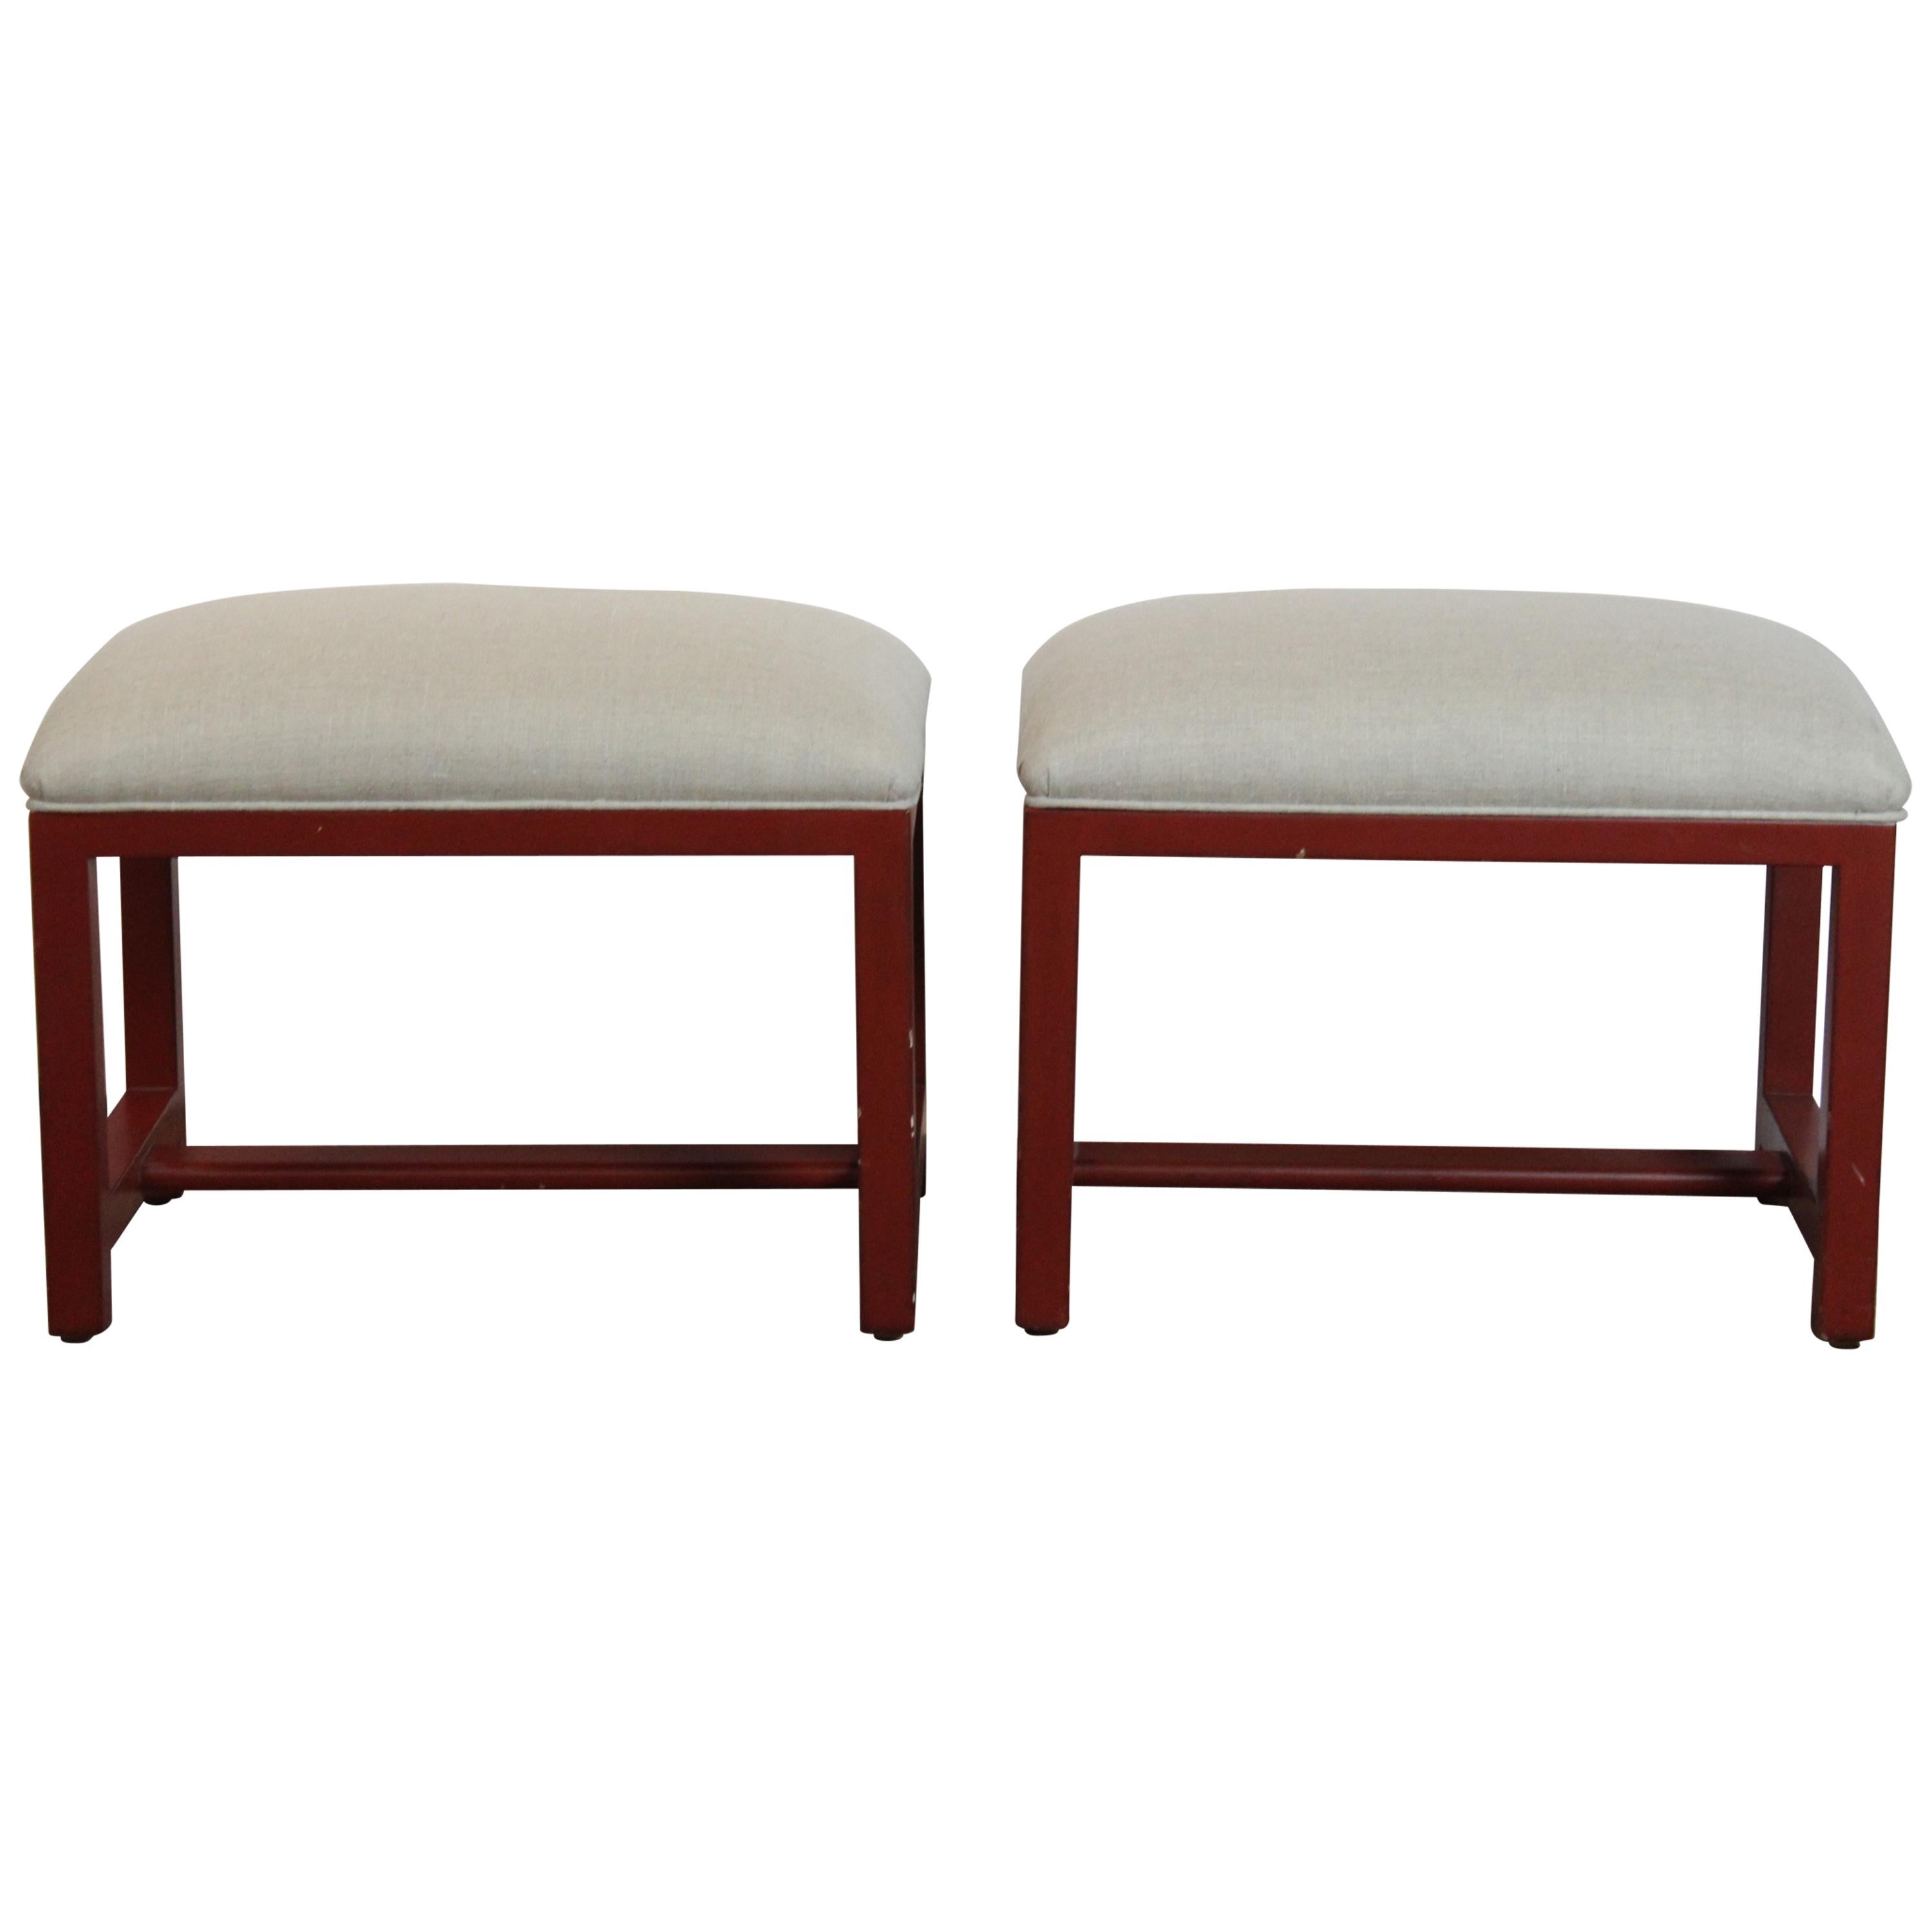 Pair of Red Bench